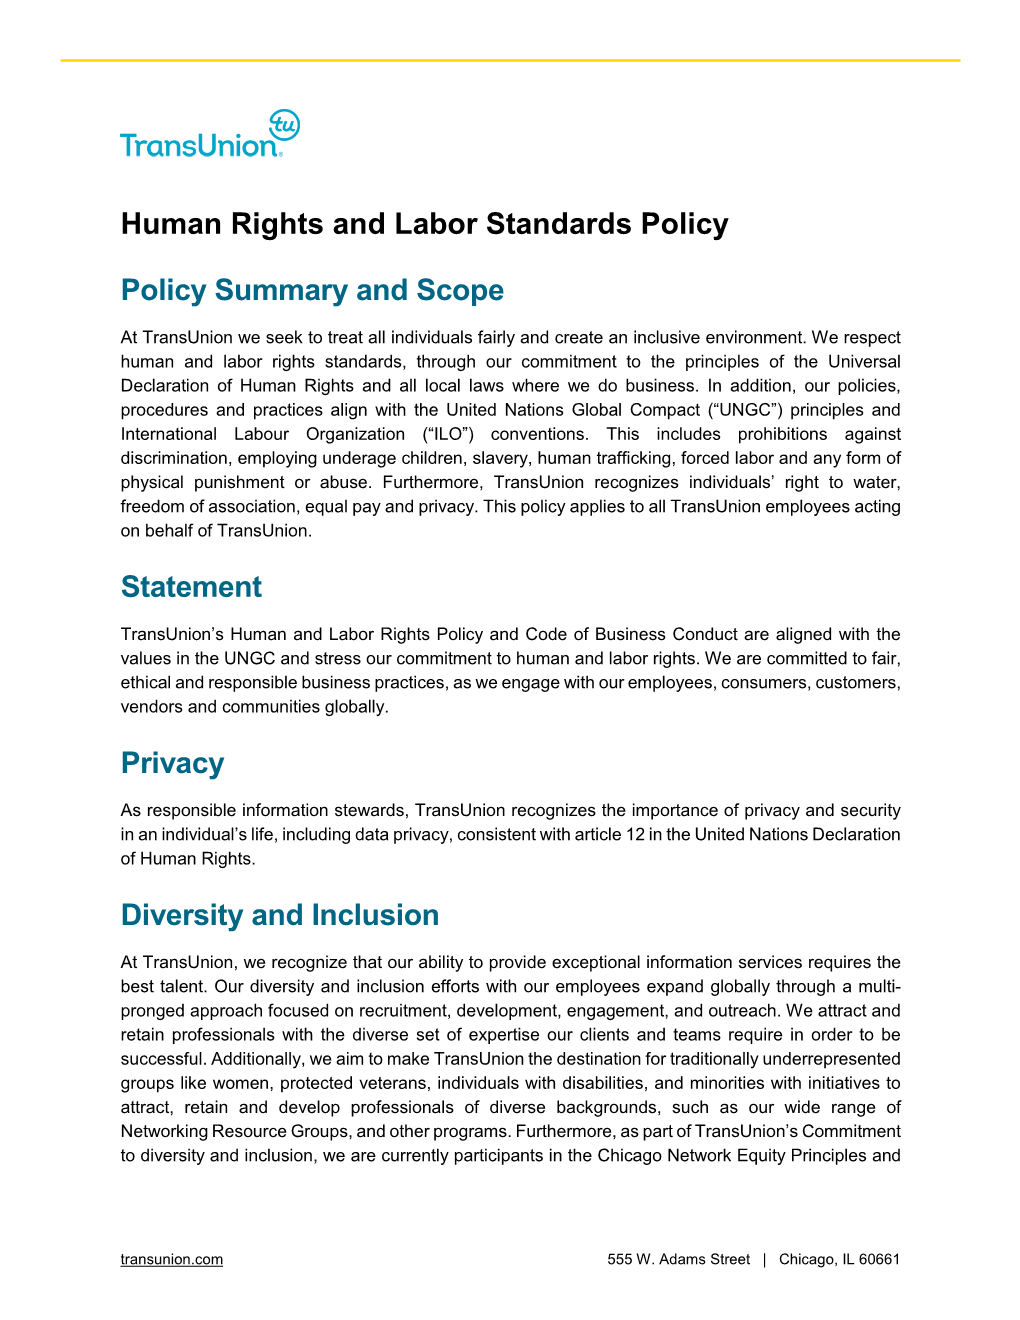 Human Rights and Labor Standards Policy